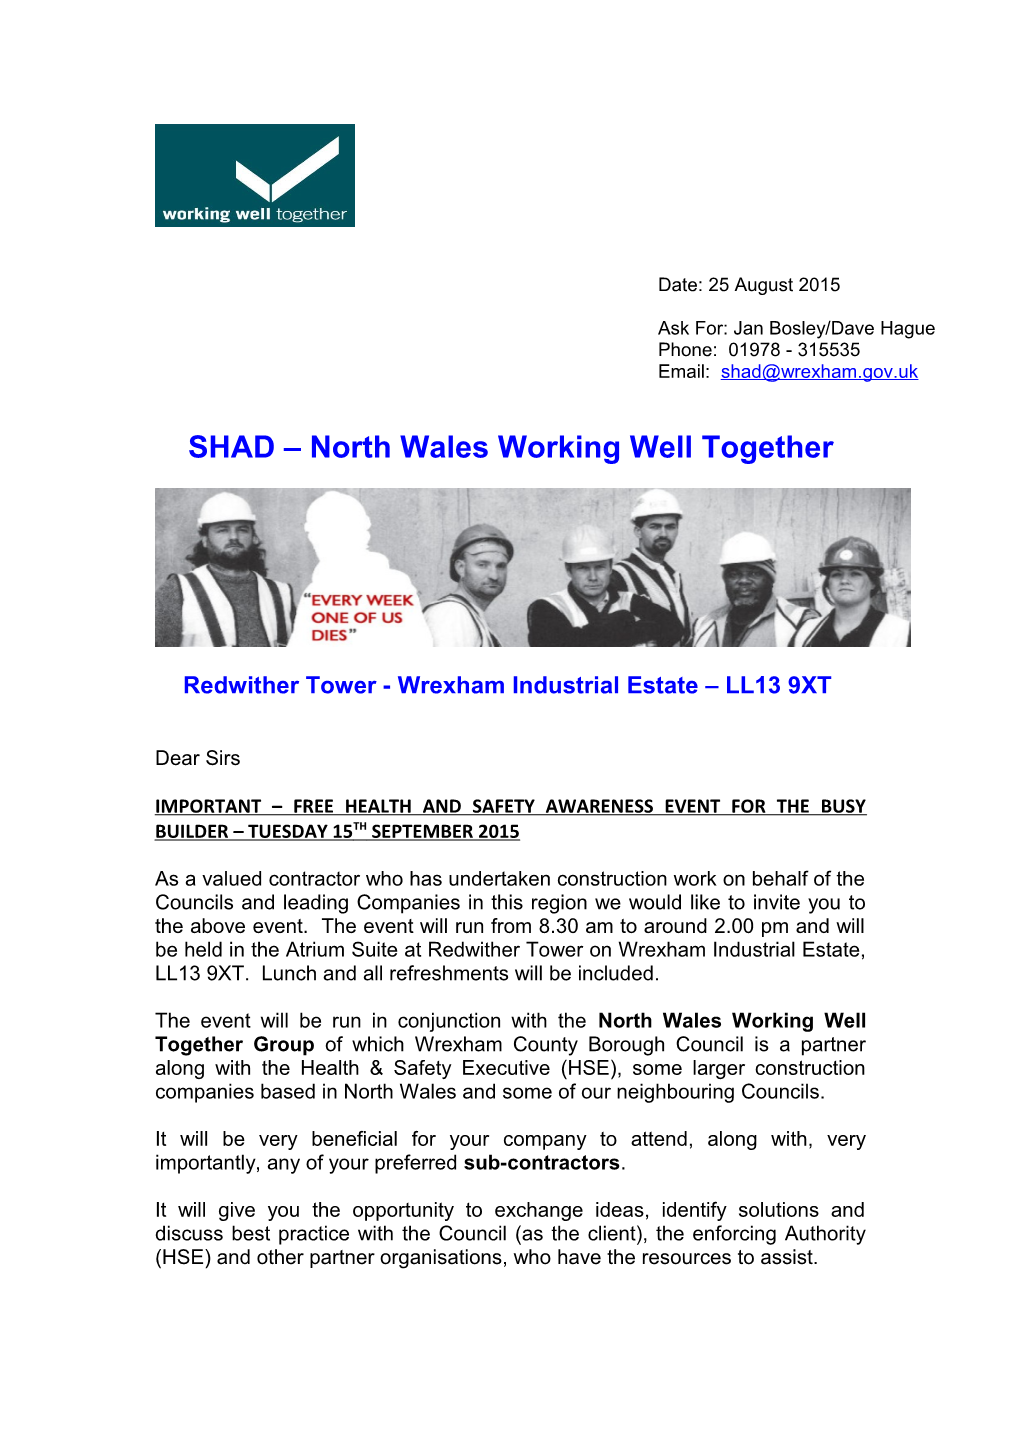 SHAD North Walesworking Well Together